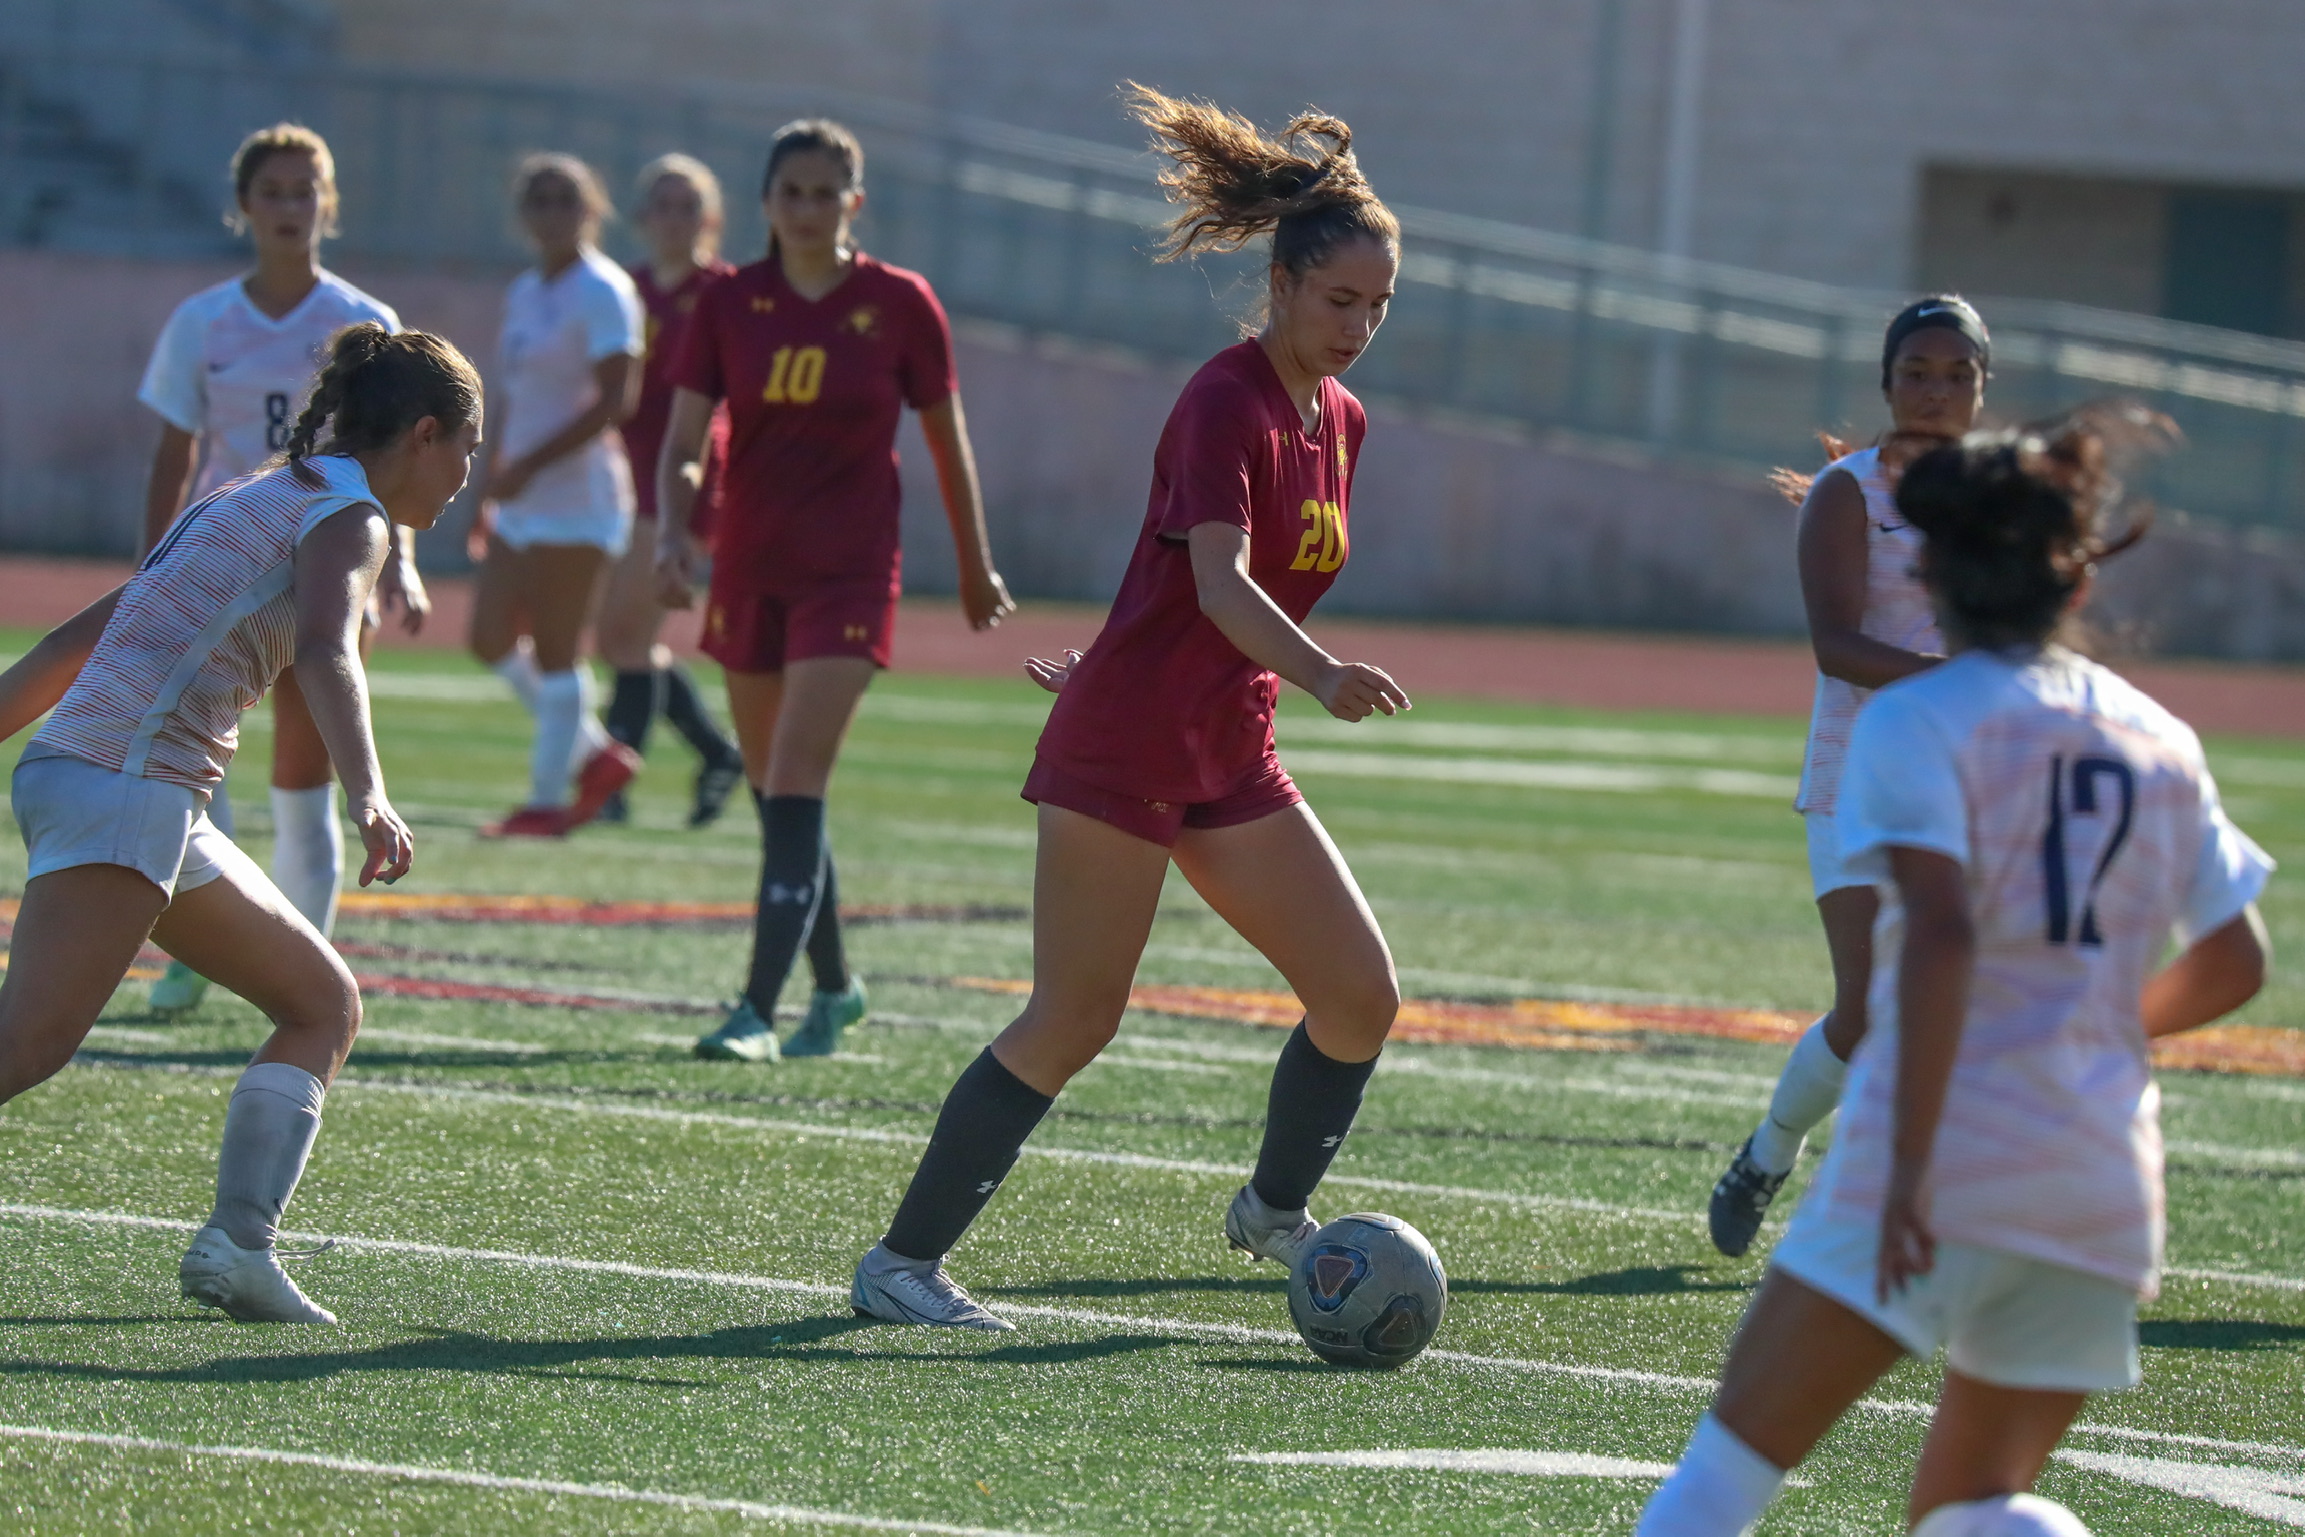 Olivia Aguilar, in a game from last week, scored one of PCC's goals in a 4-1 win at LA Valley College on Friday (photo by Michael Watkins).